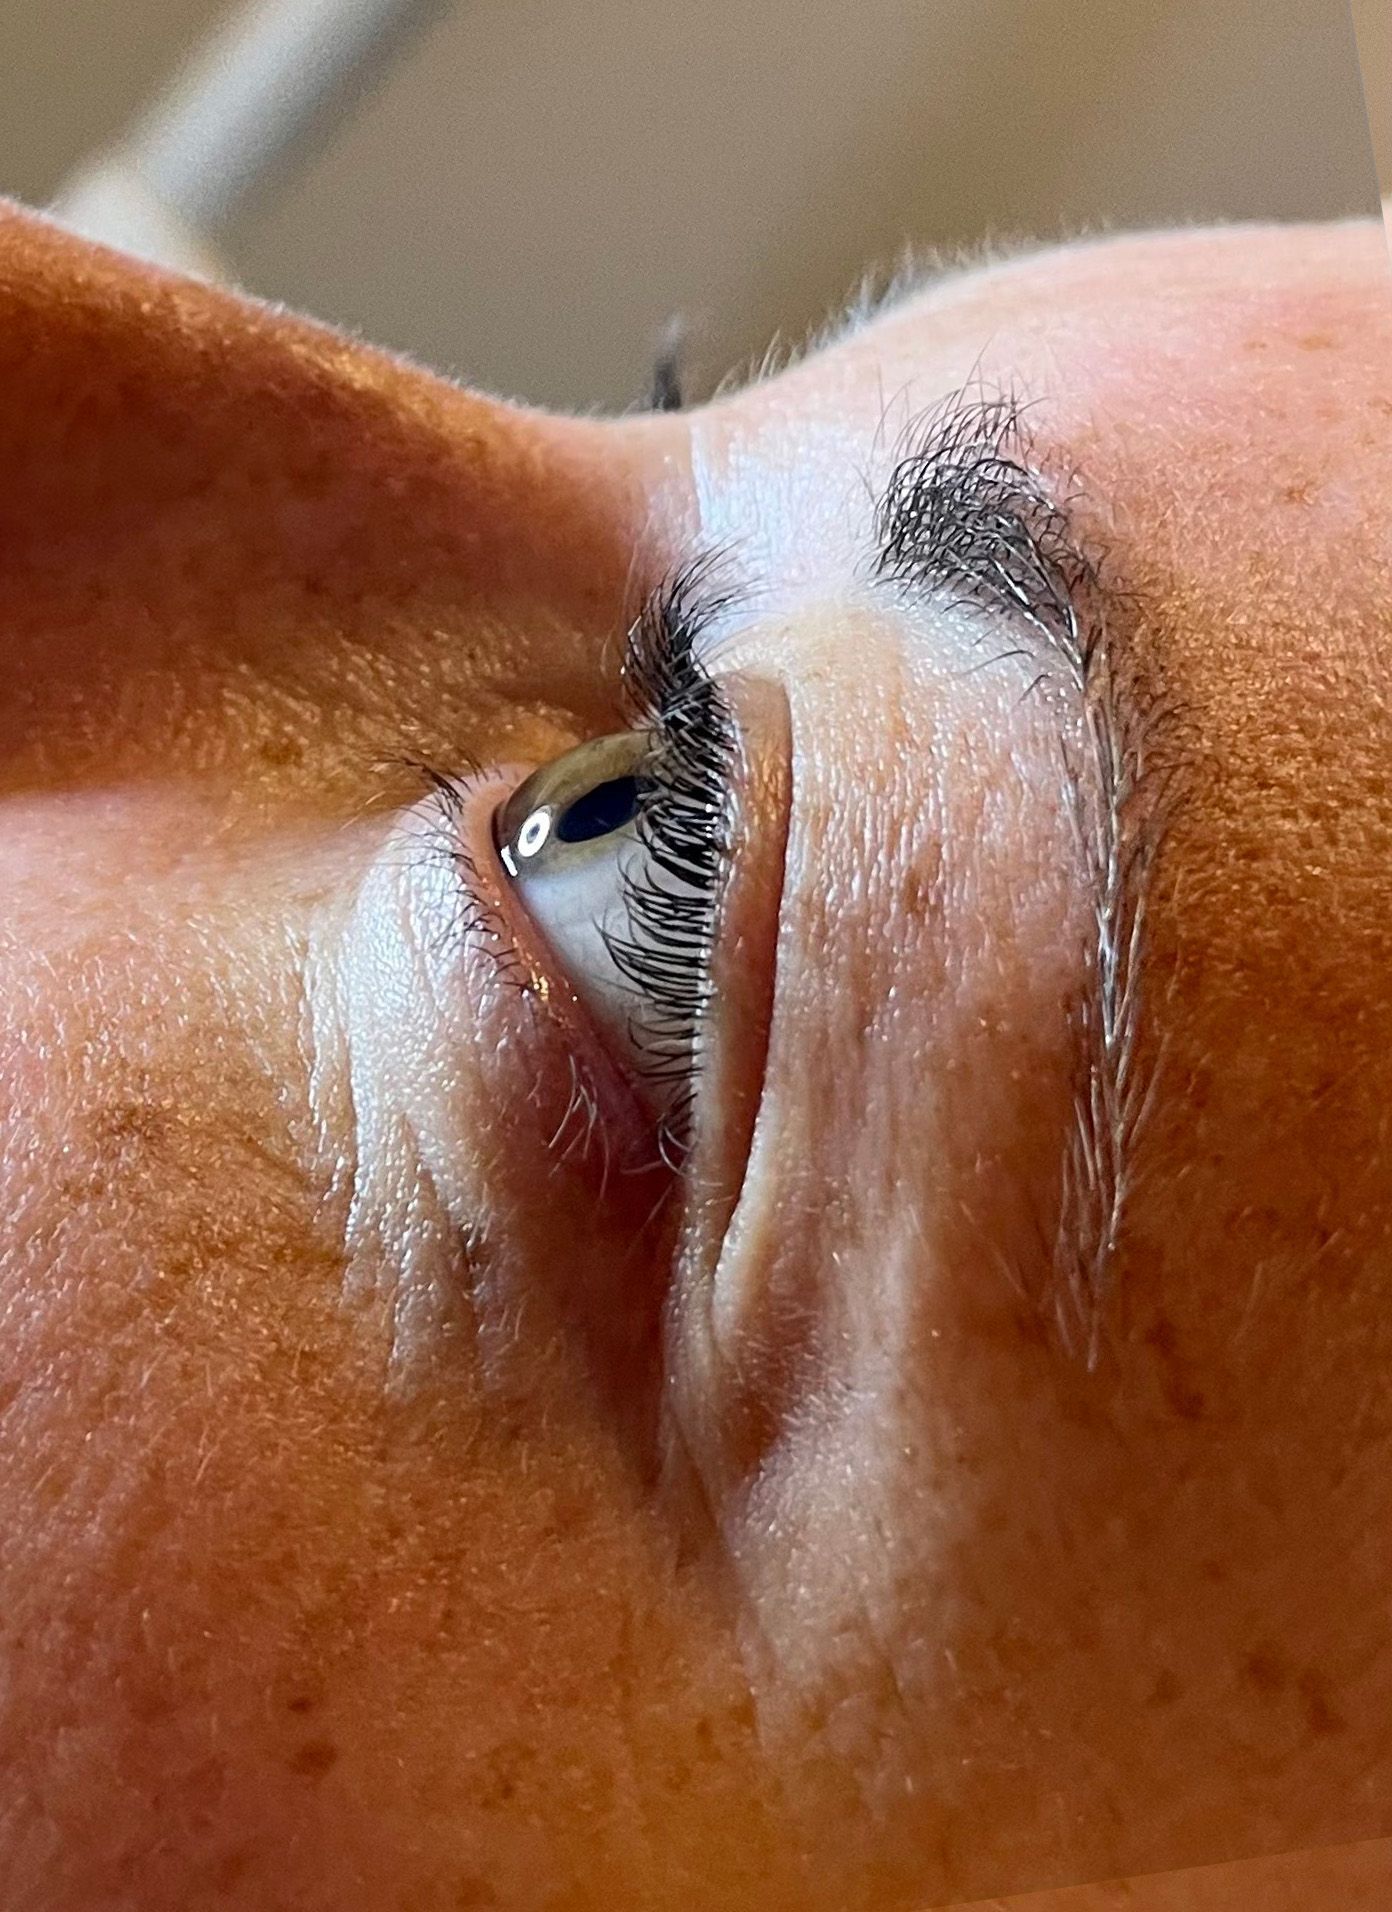 before & after a close up of a woman 's eye with long eyelashes